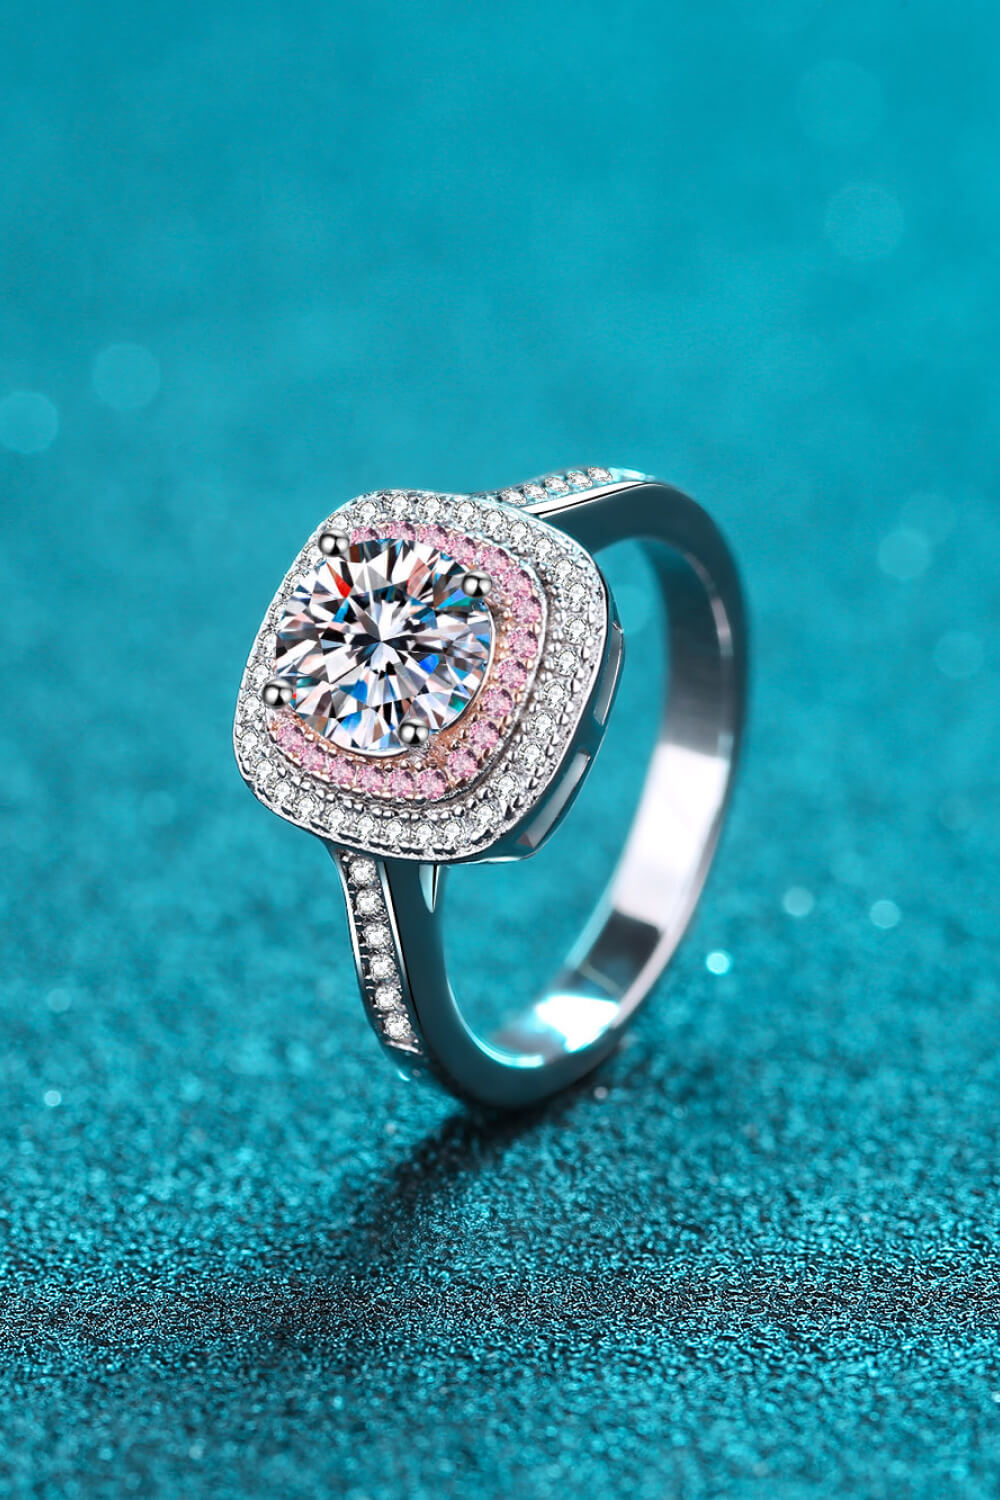 Need You Now Moissanite Ring - Tophatter Shopping Deals